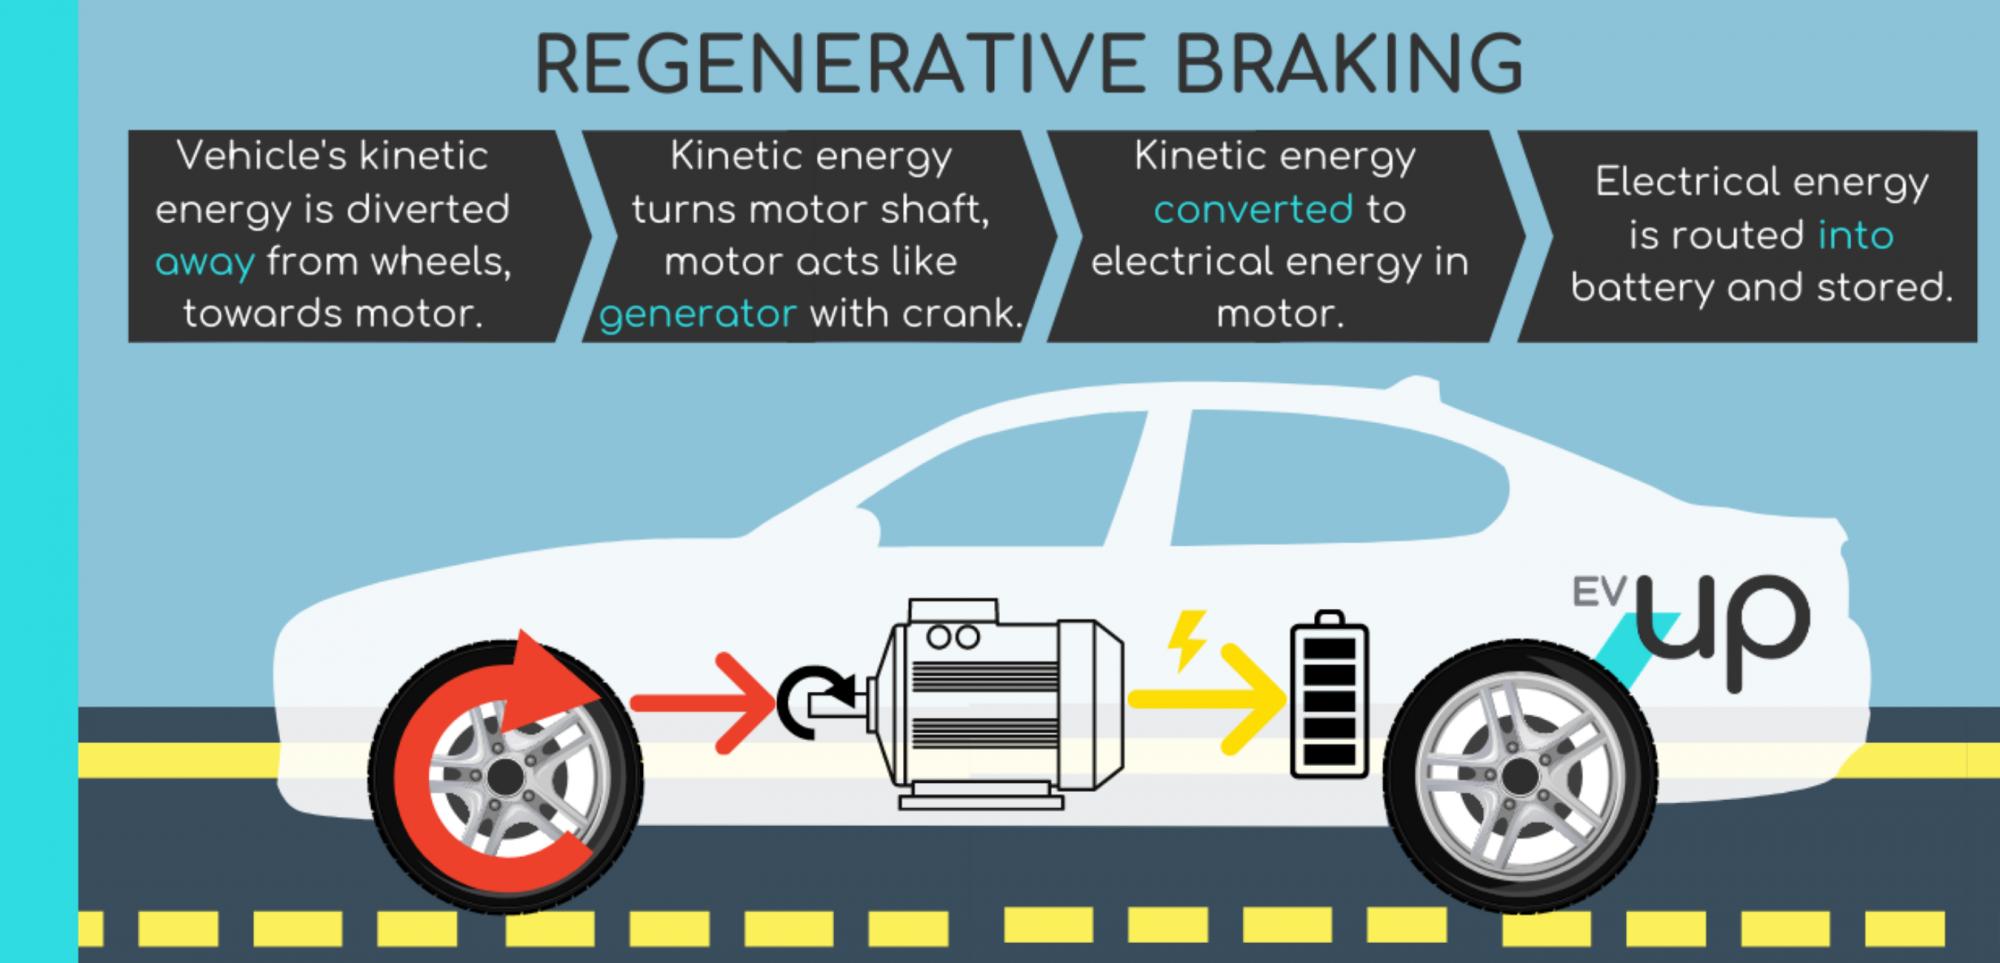 How does regenerative braking work in an electric vehicle?